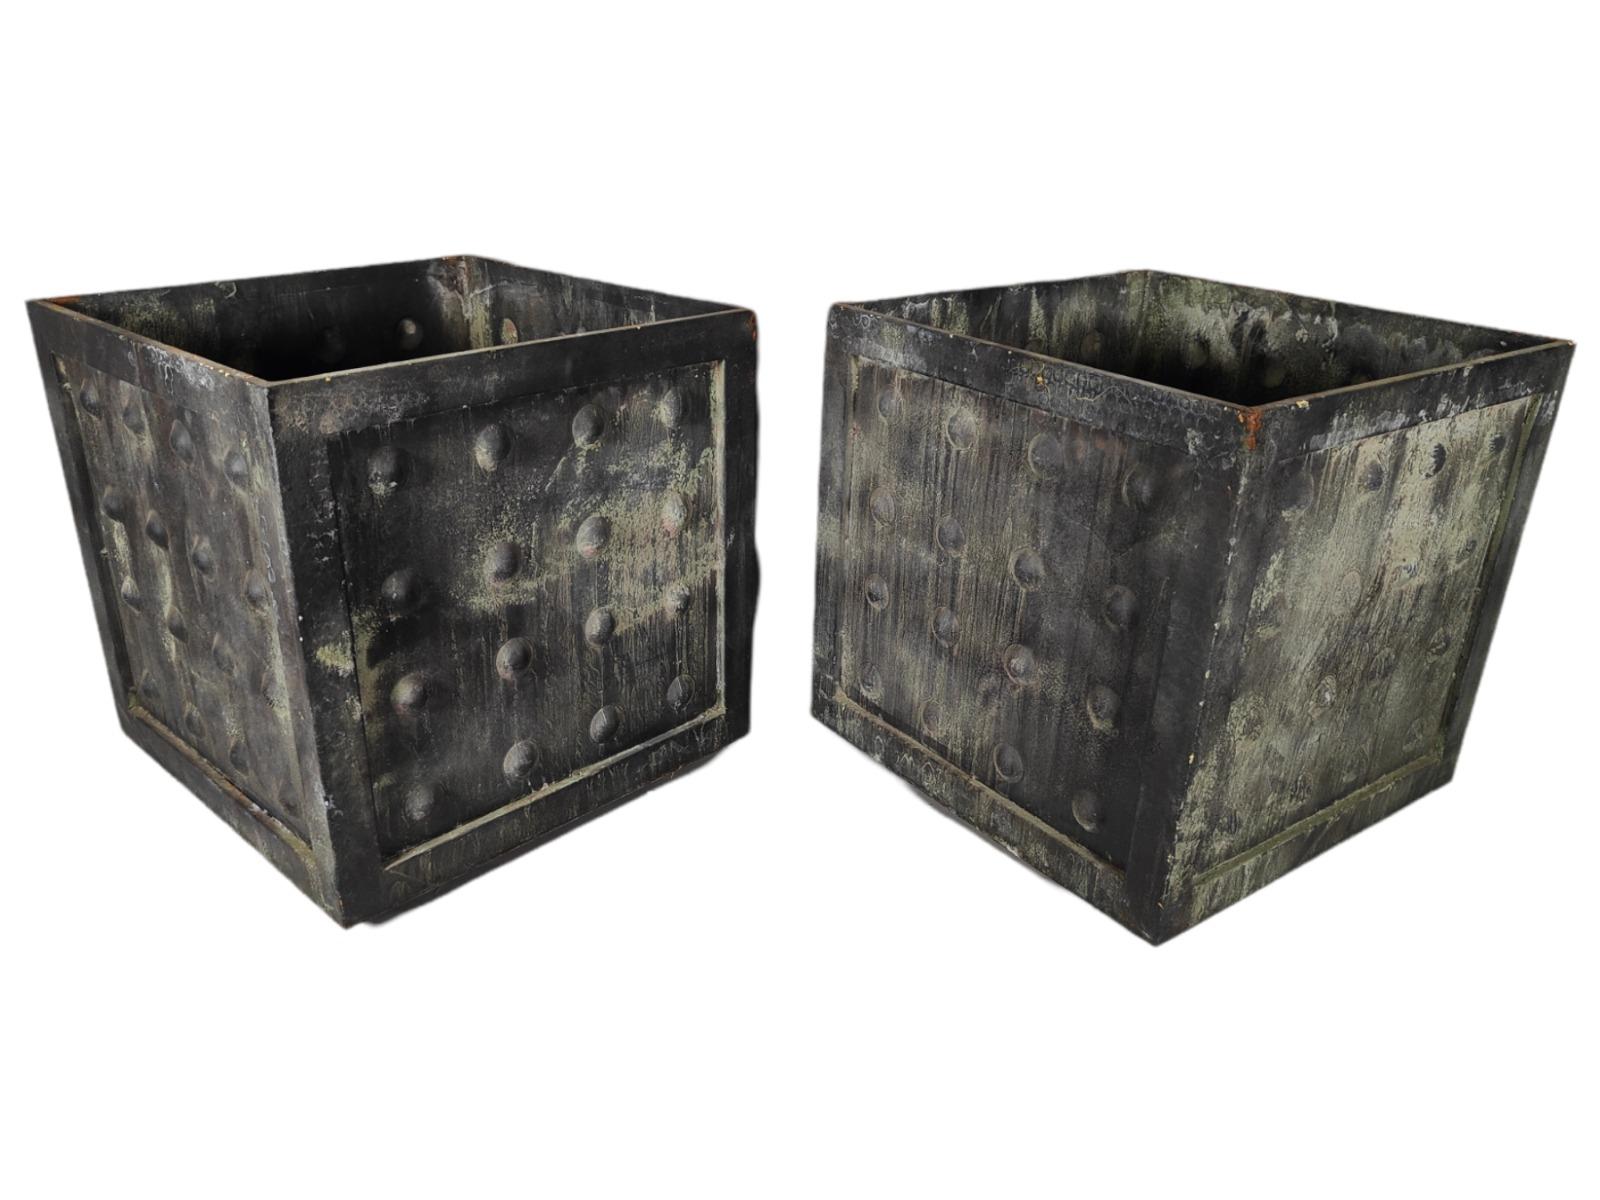 Pair of square-shaped zinc pots decorated with hemi-spheres on the surface. 1950s. Measures: 46X46X44 CM
good condition.